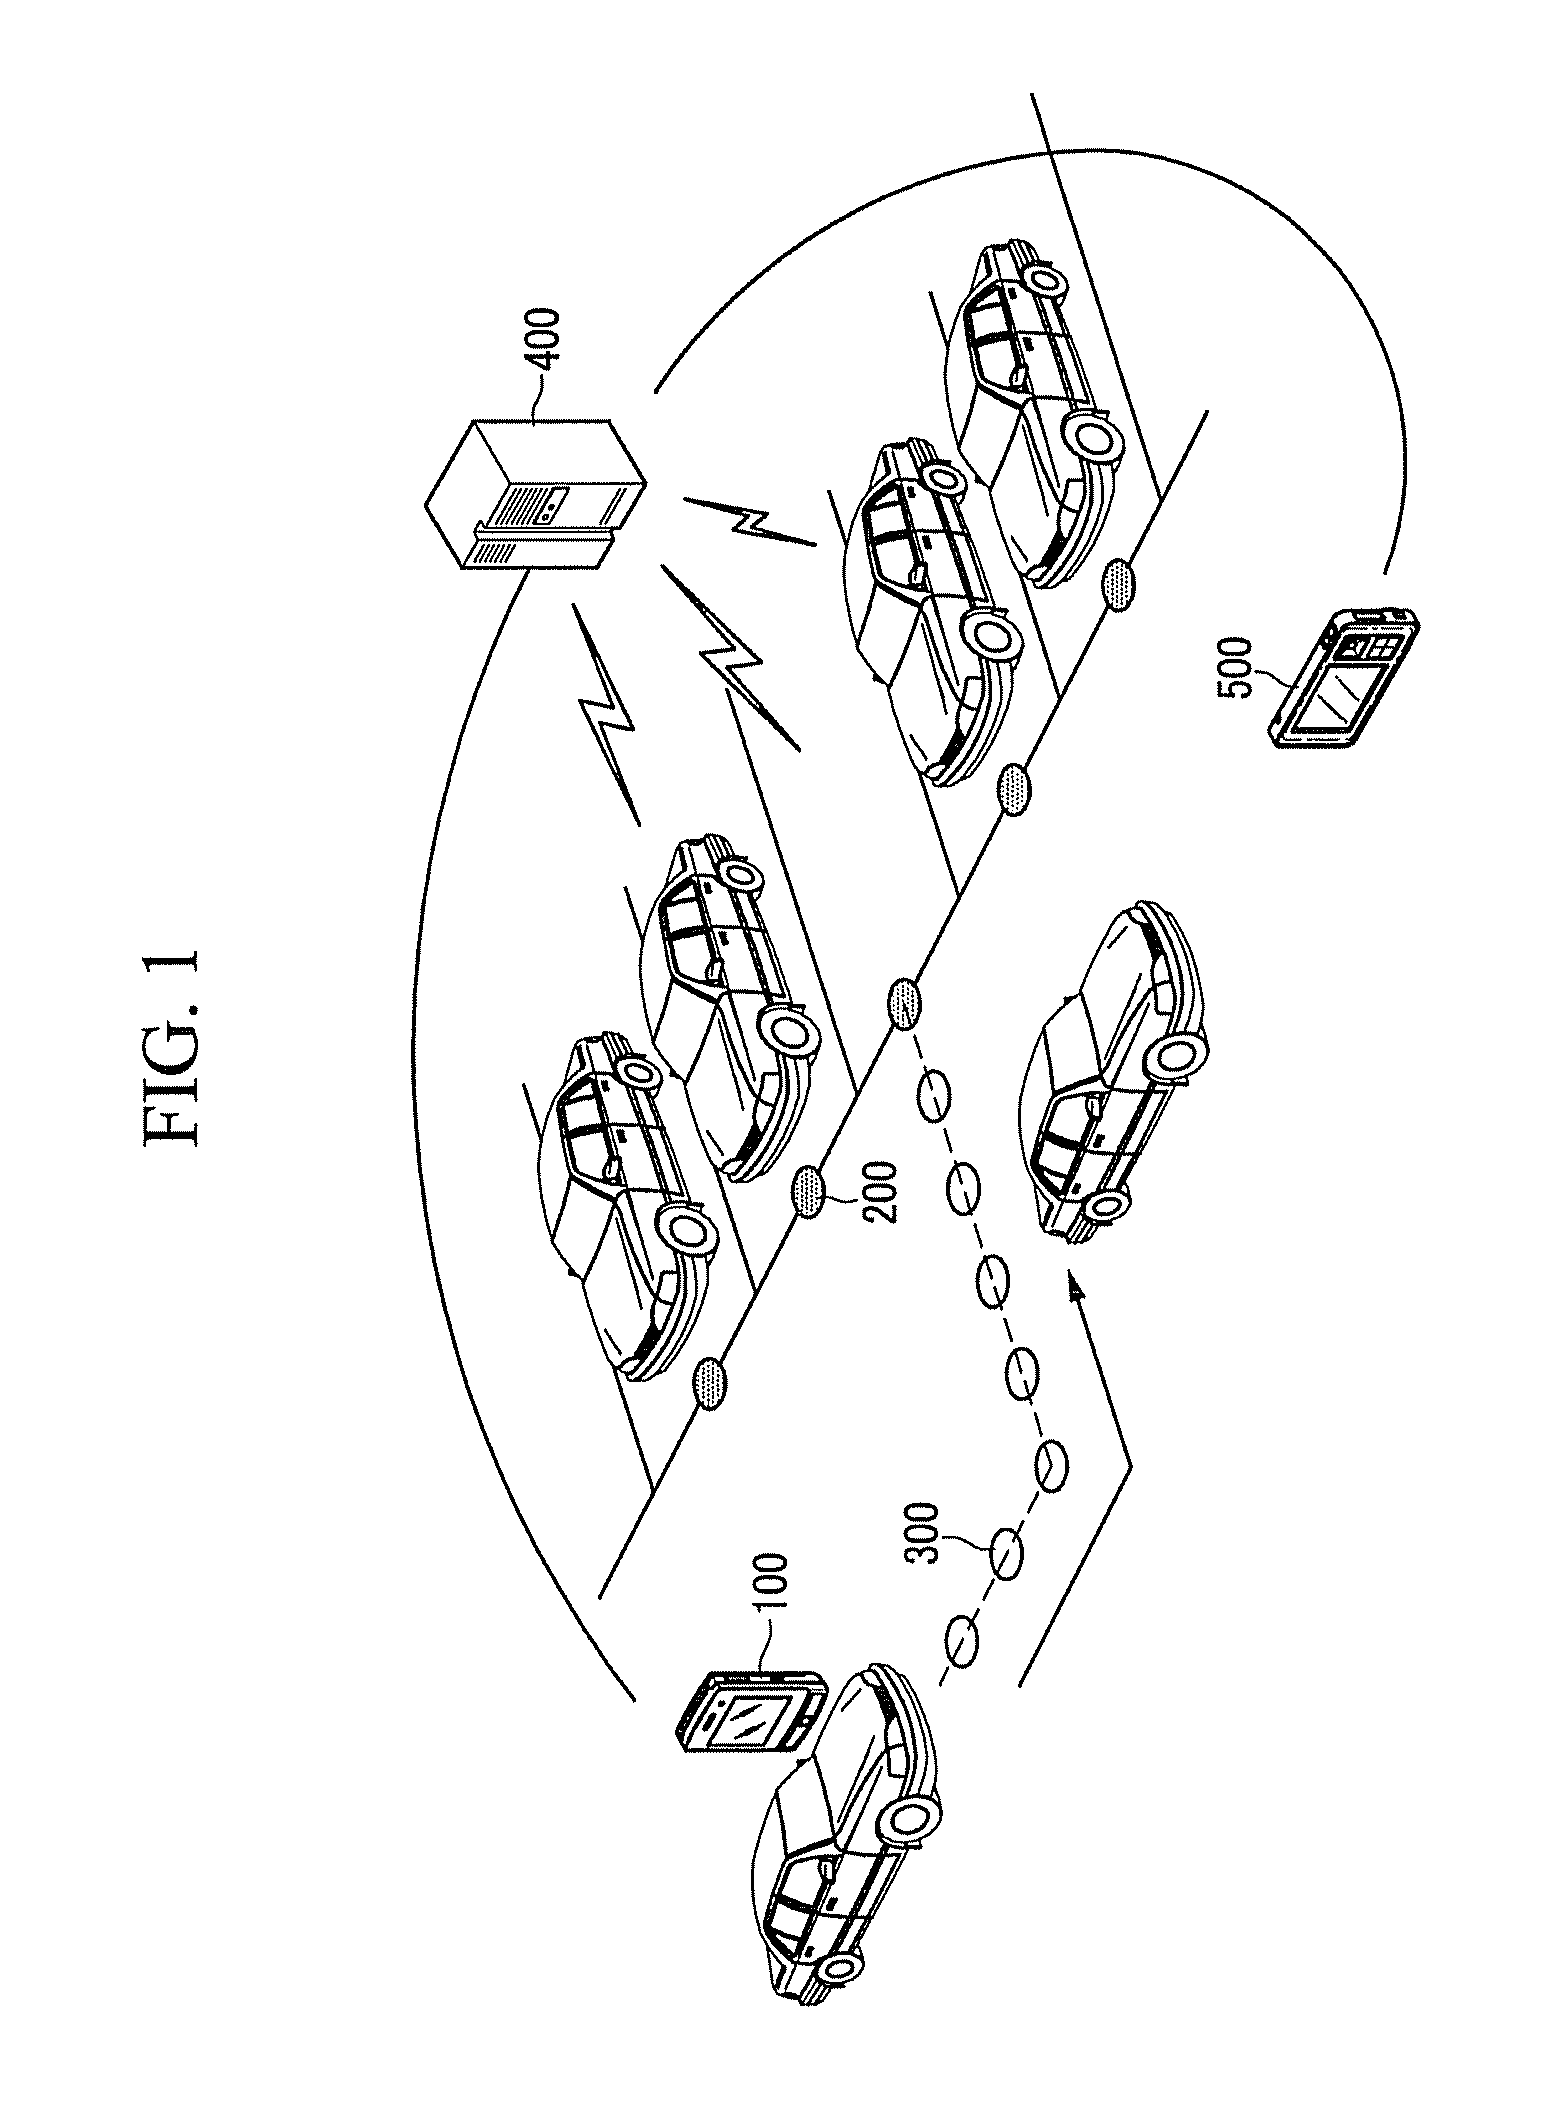 System and method for auto valet parking